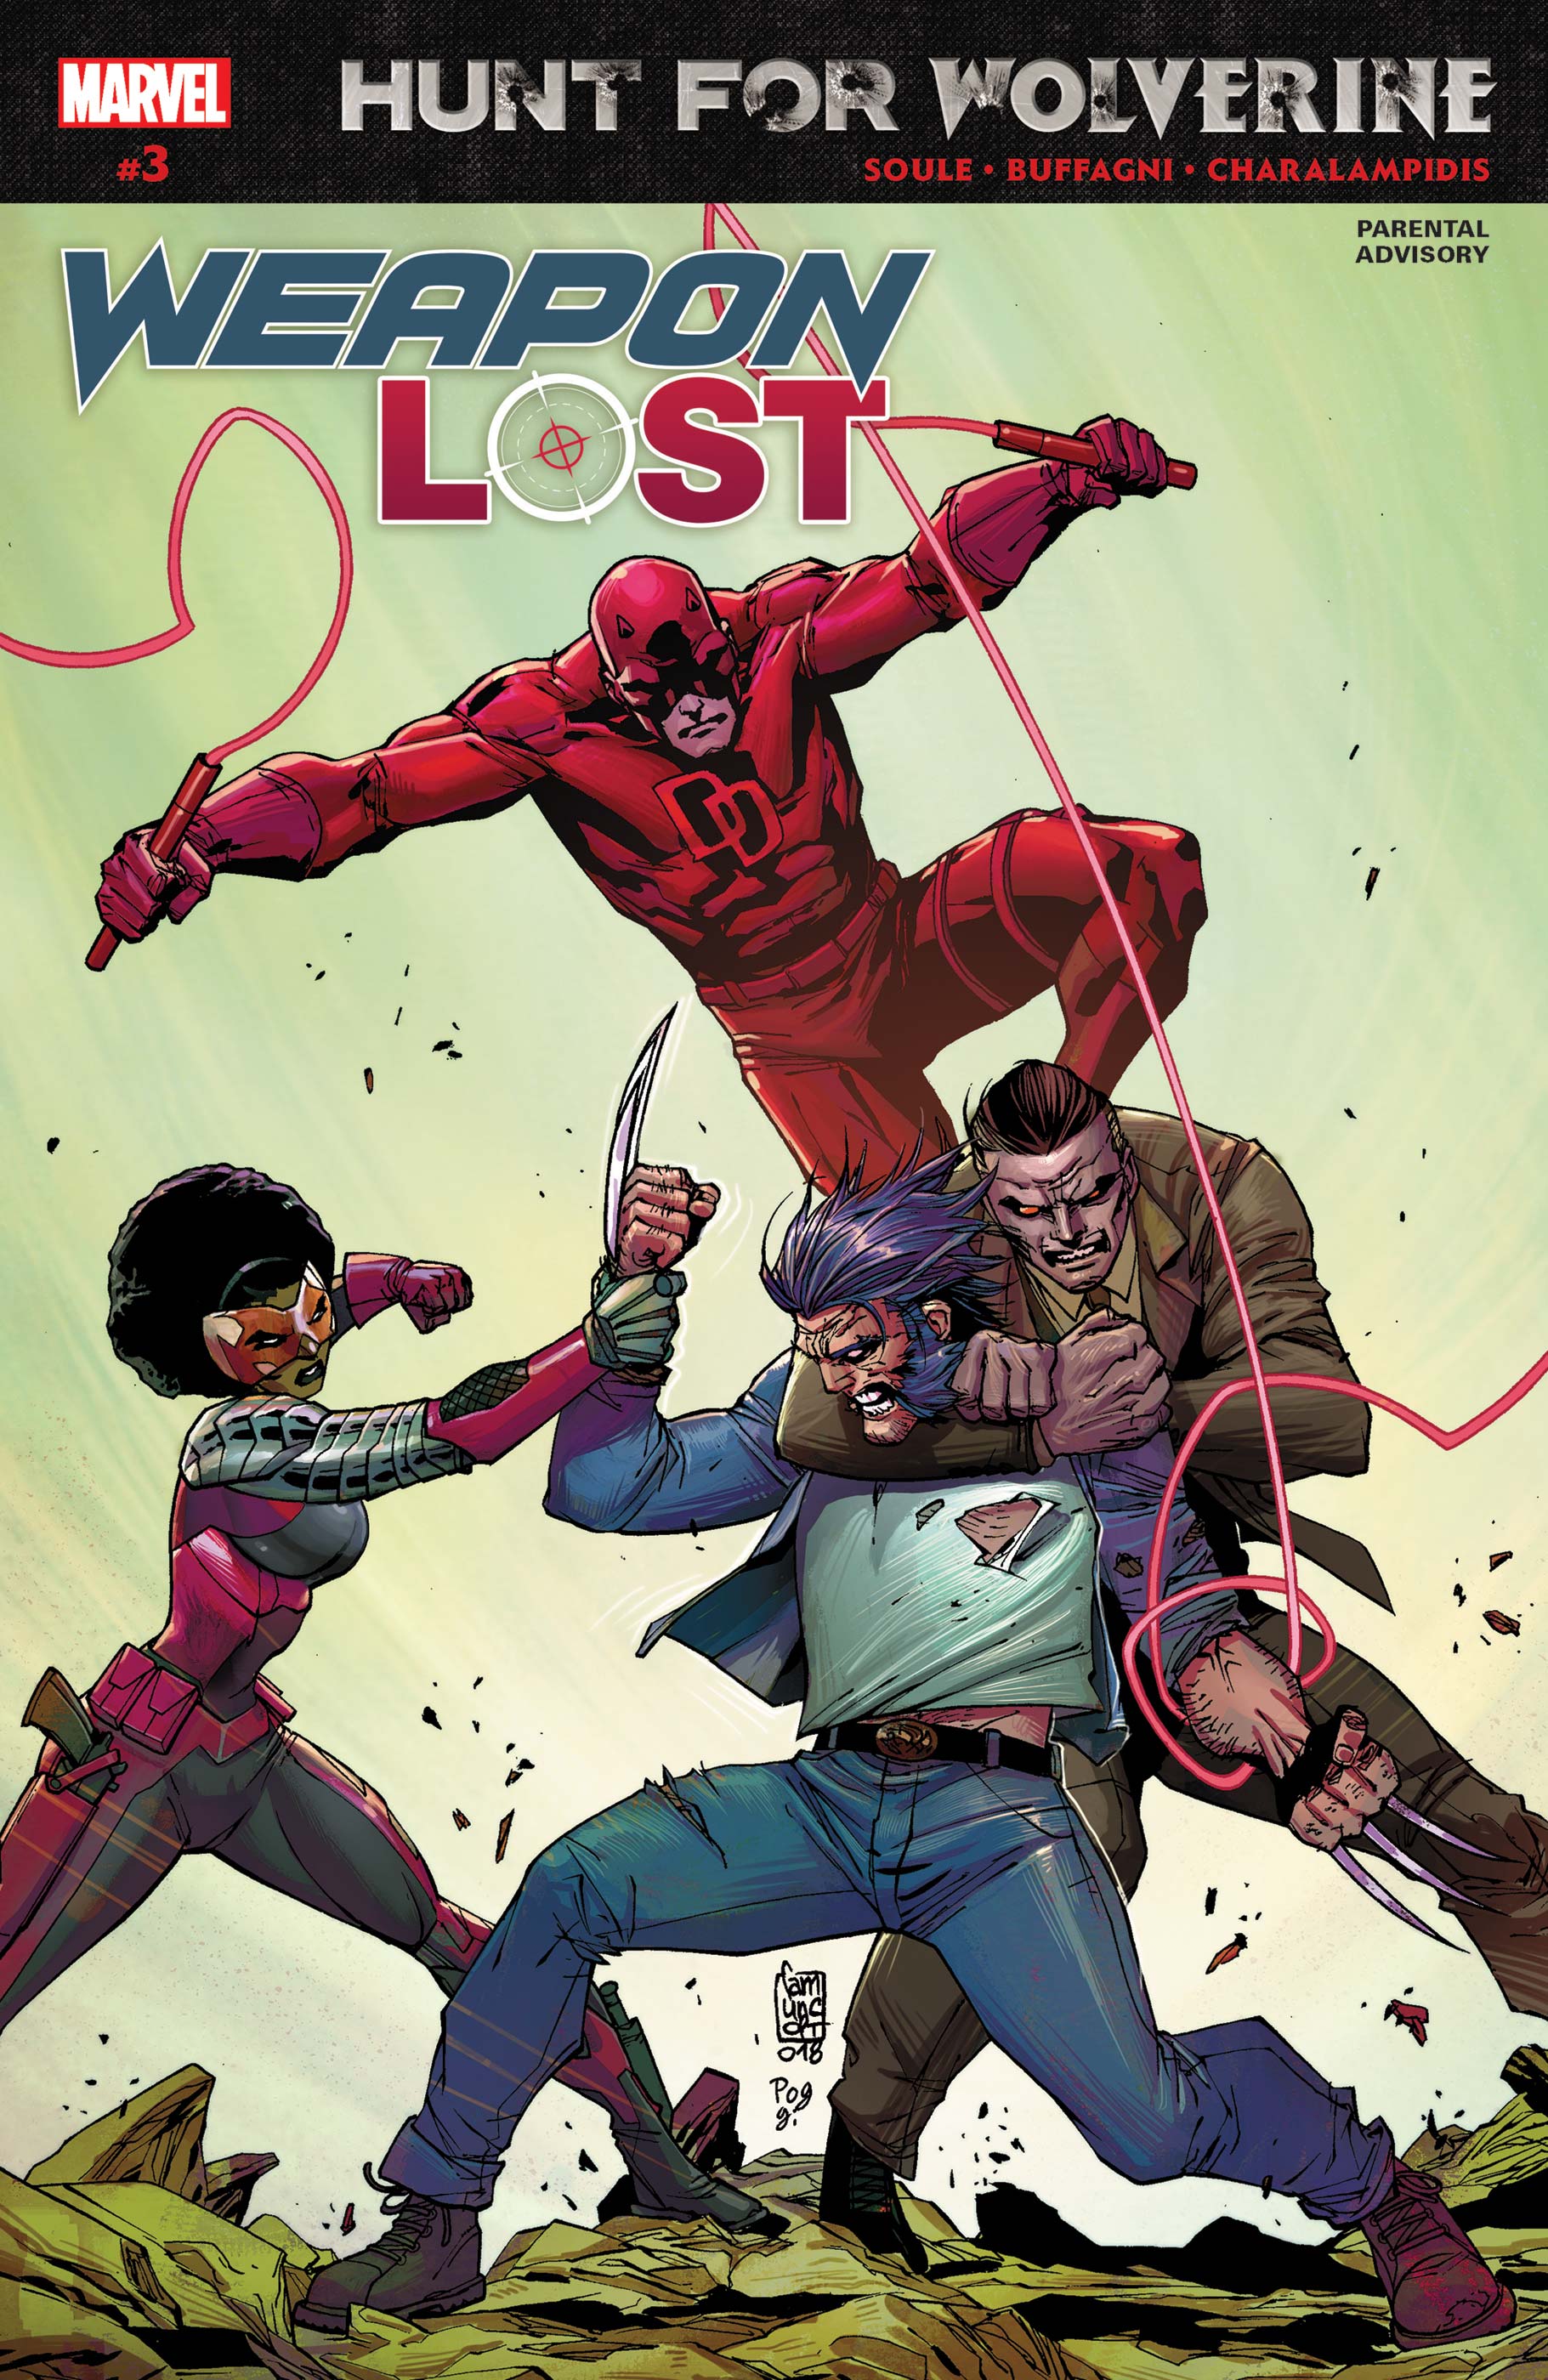 Hunt for Wolverine: Weapon Lost (2018) #2